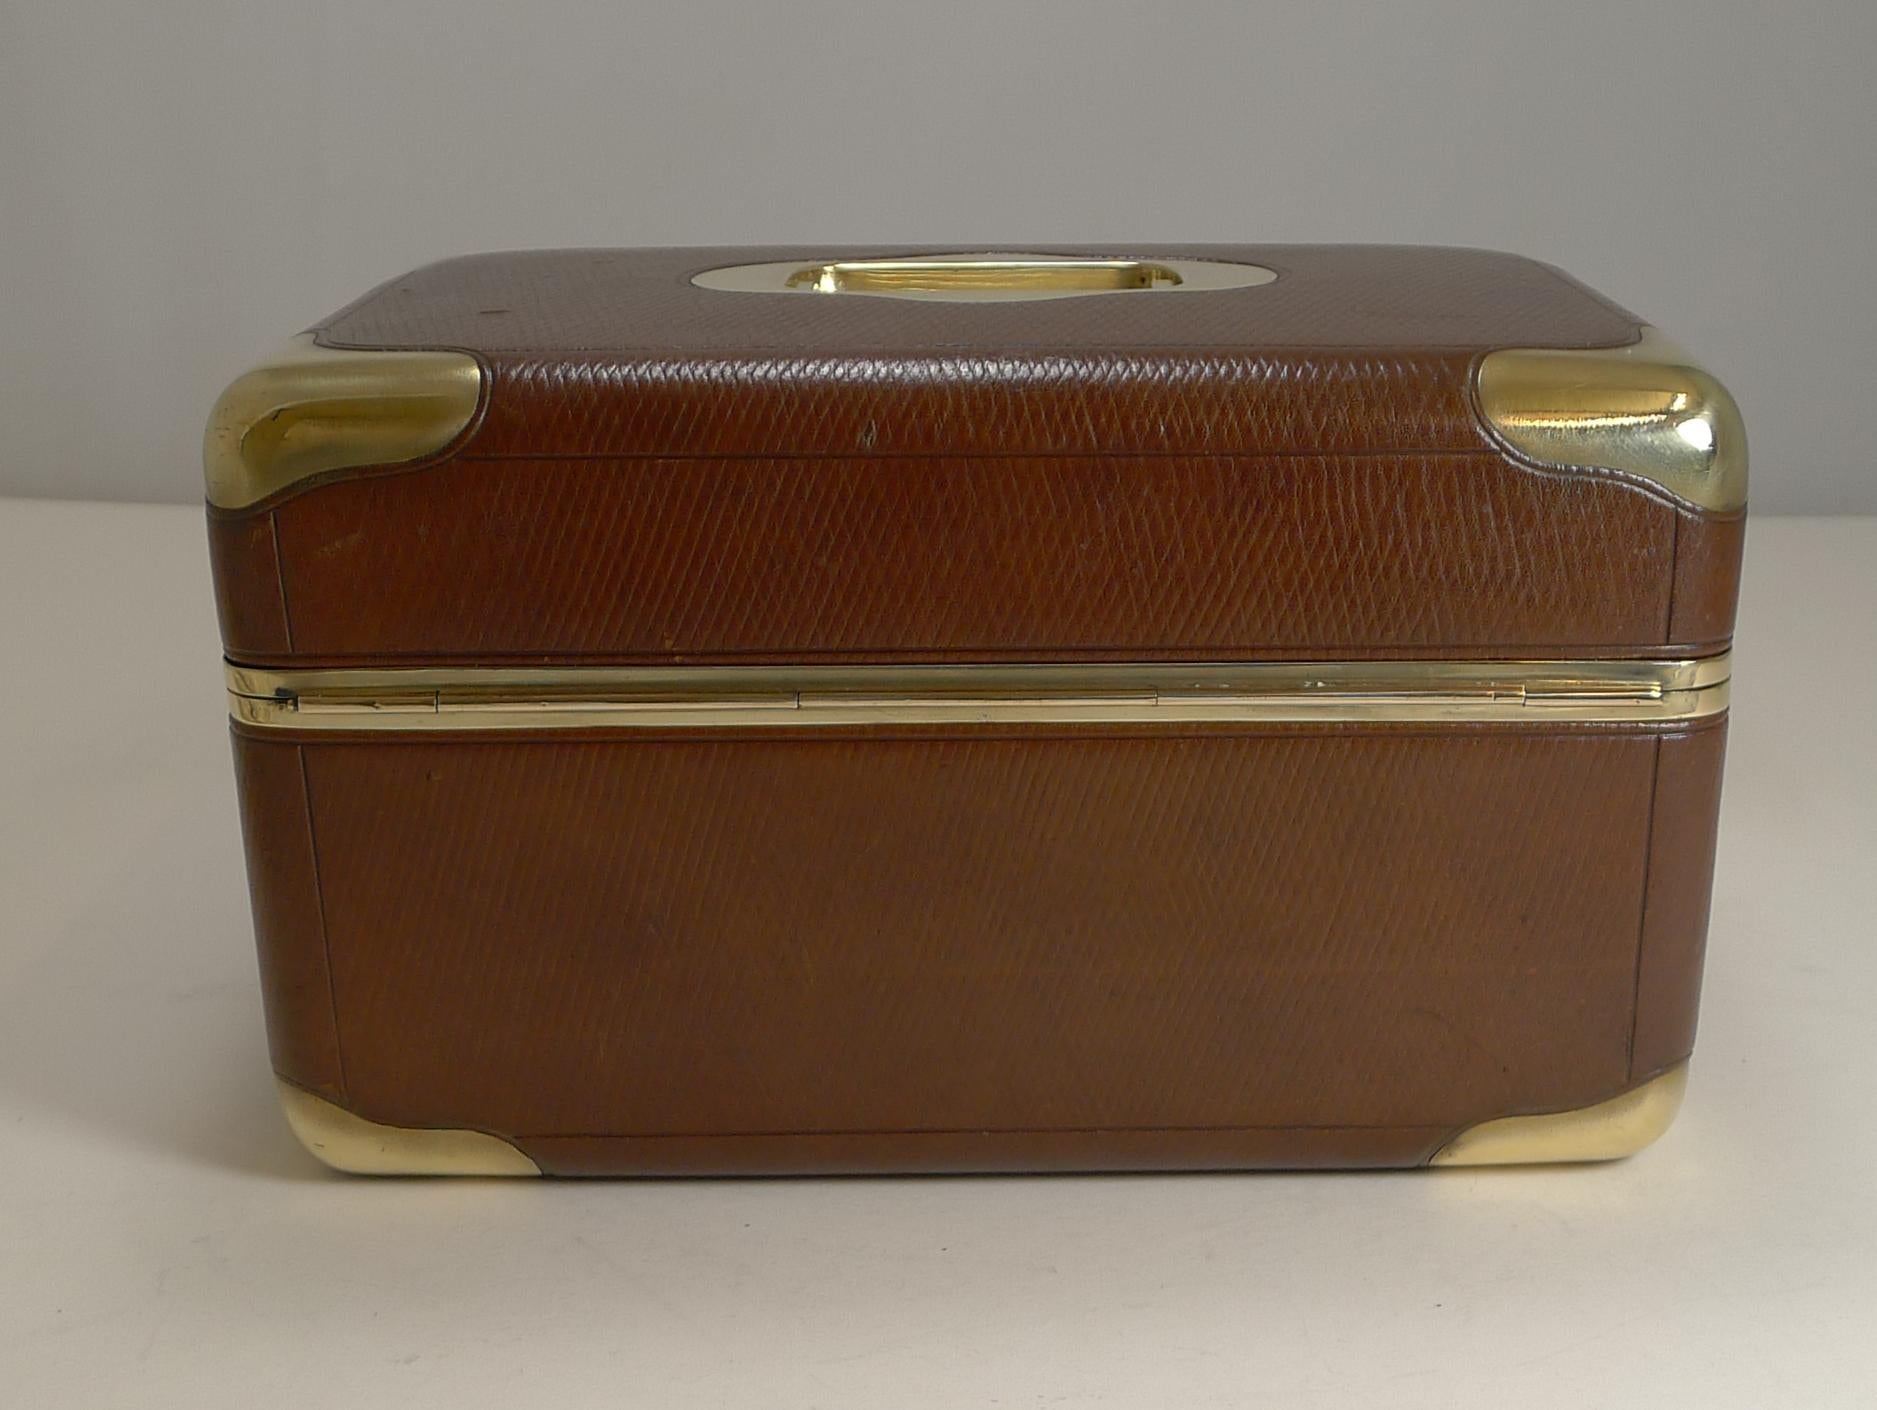 Late Victorian Fine Antique French Leather and Brass Jewelry Box, circa 1890, Signed M.G Paris